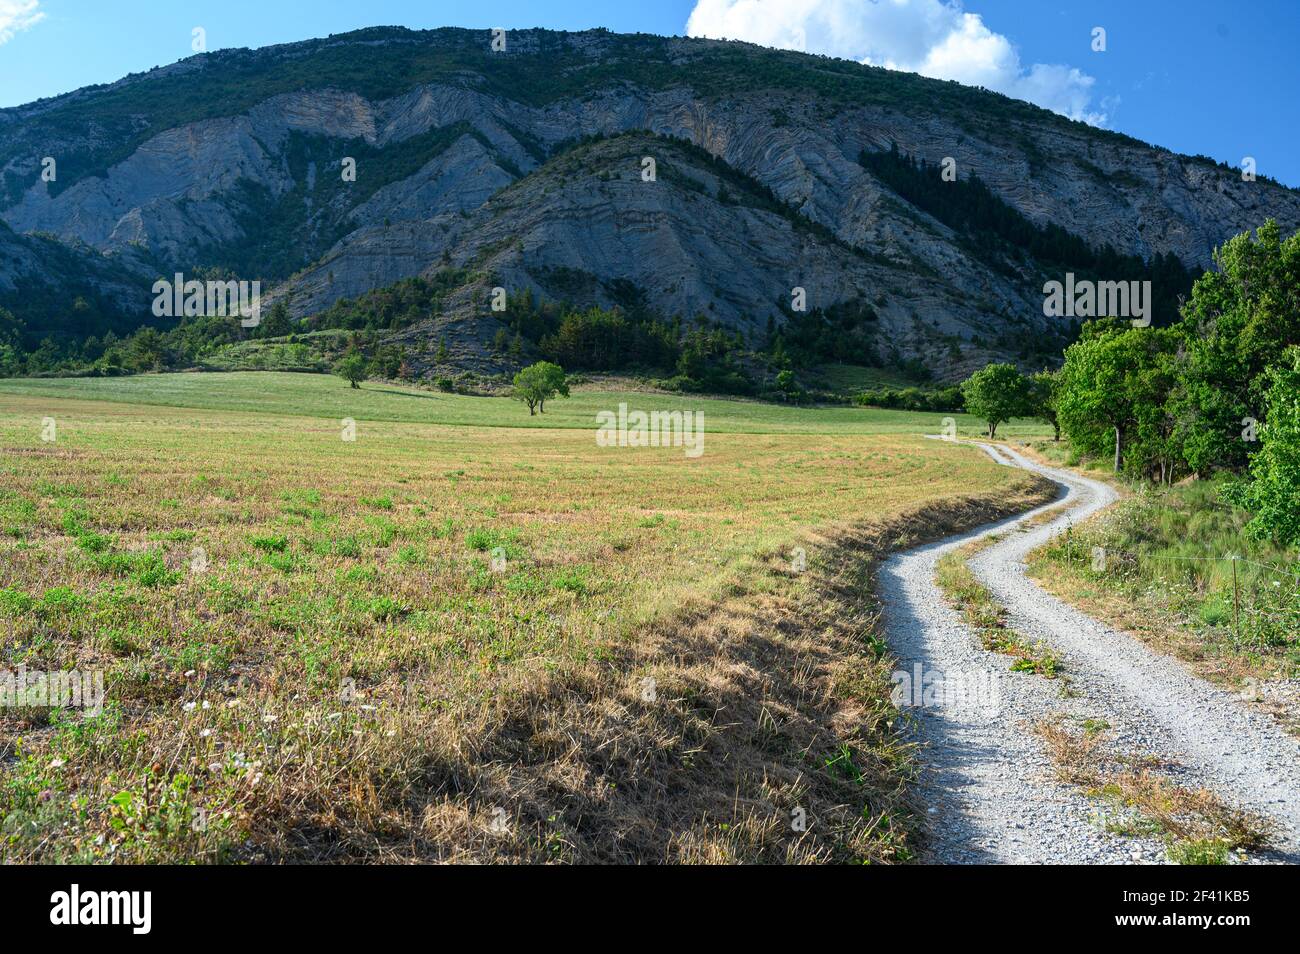 Stone path at the foot of the mountain passing grassy field Stock Photo